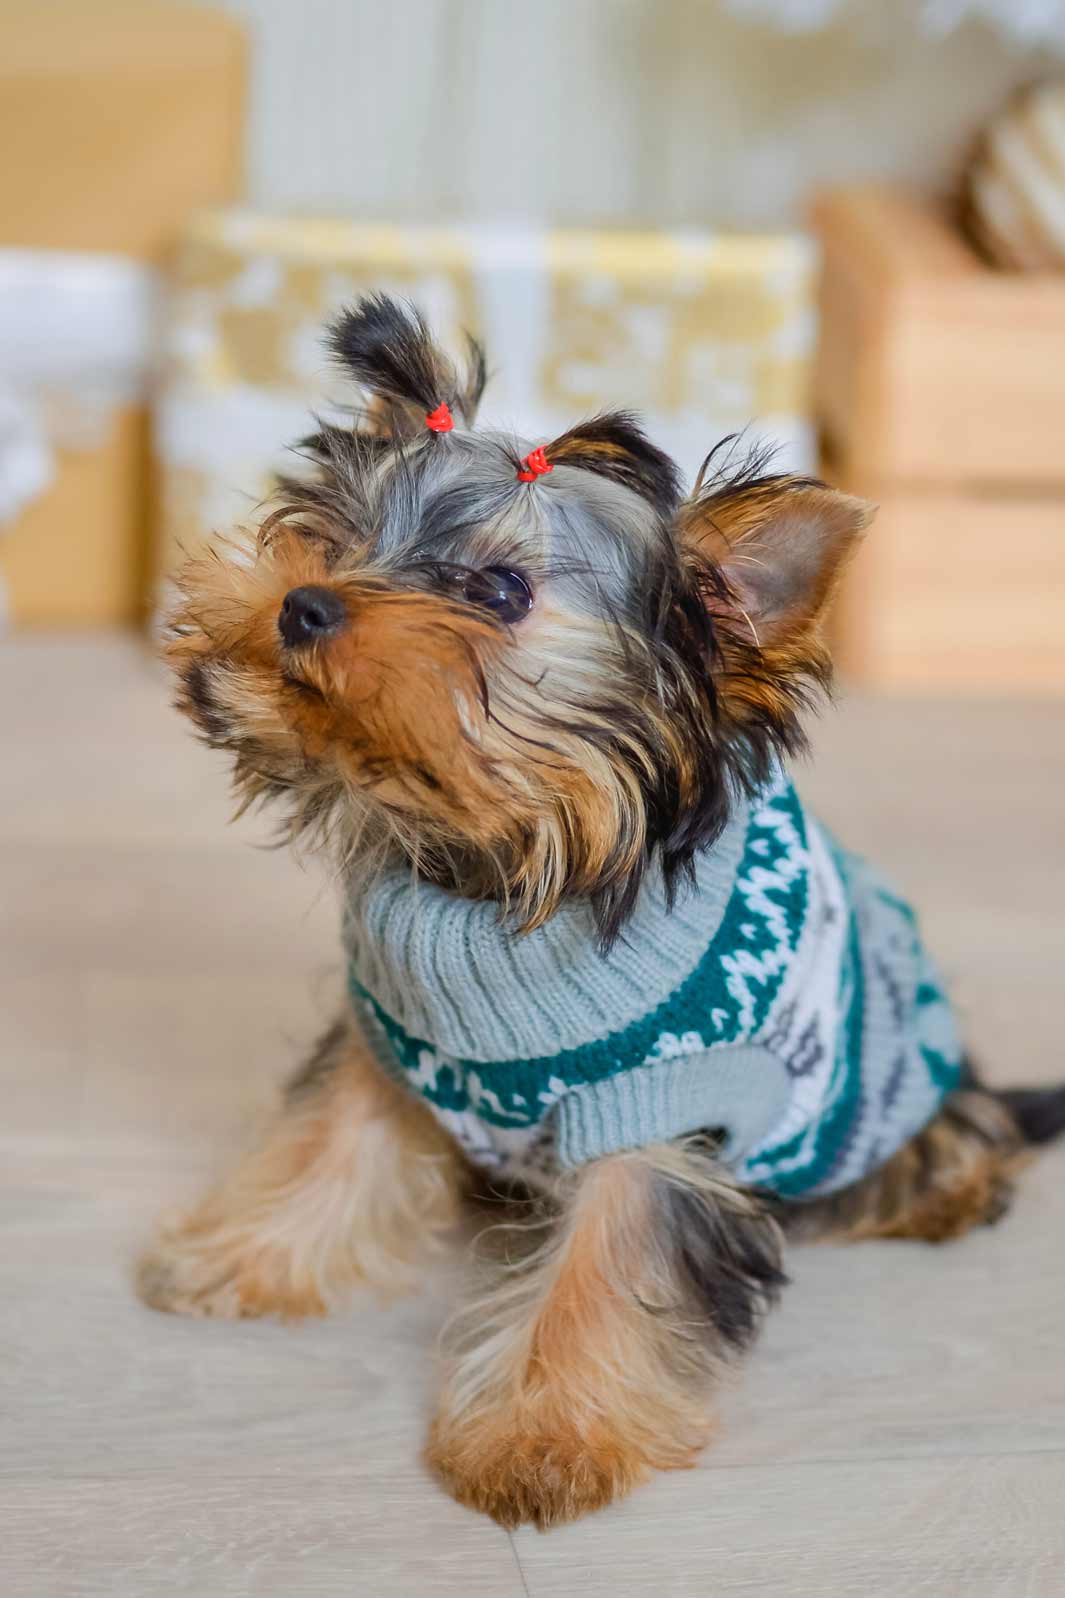 Adorable Yorkshire Terrier wearing a knitted dog sweater for the winter holiday season.